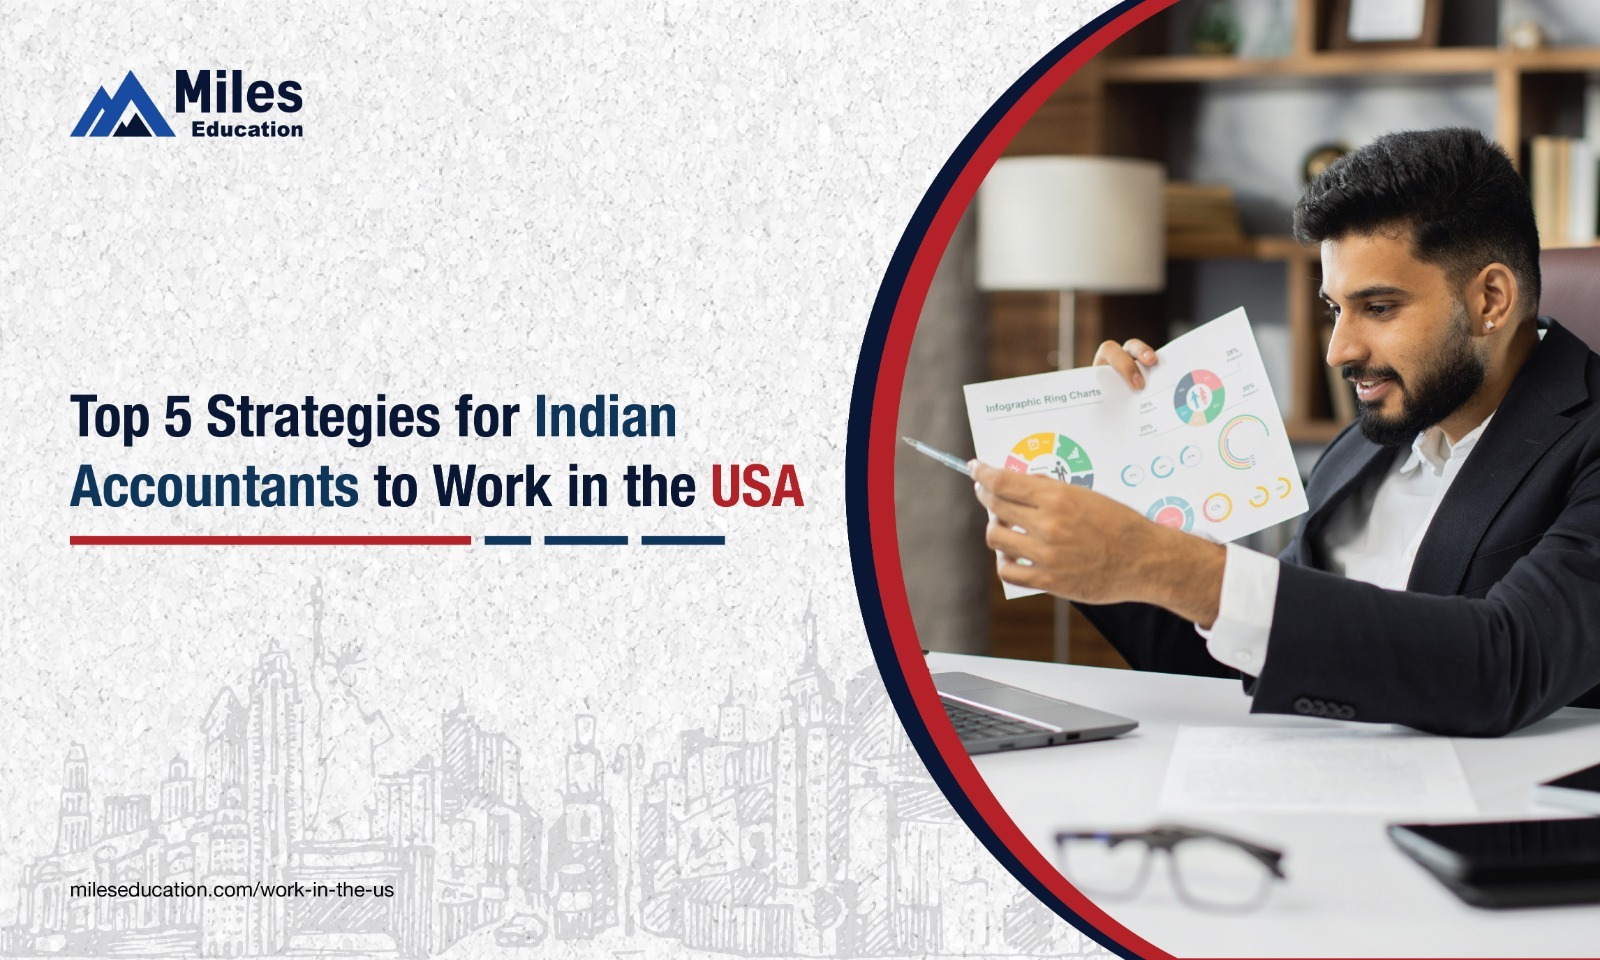 Top 5 Strategies for Indian Accountants to Work in the USA